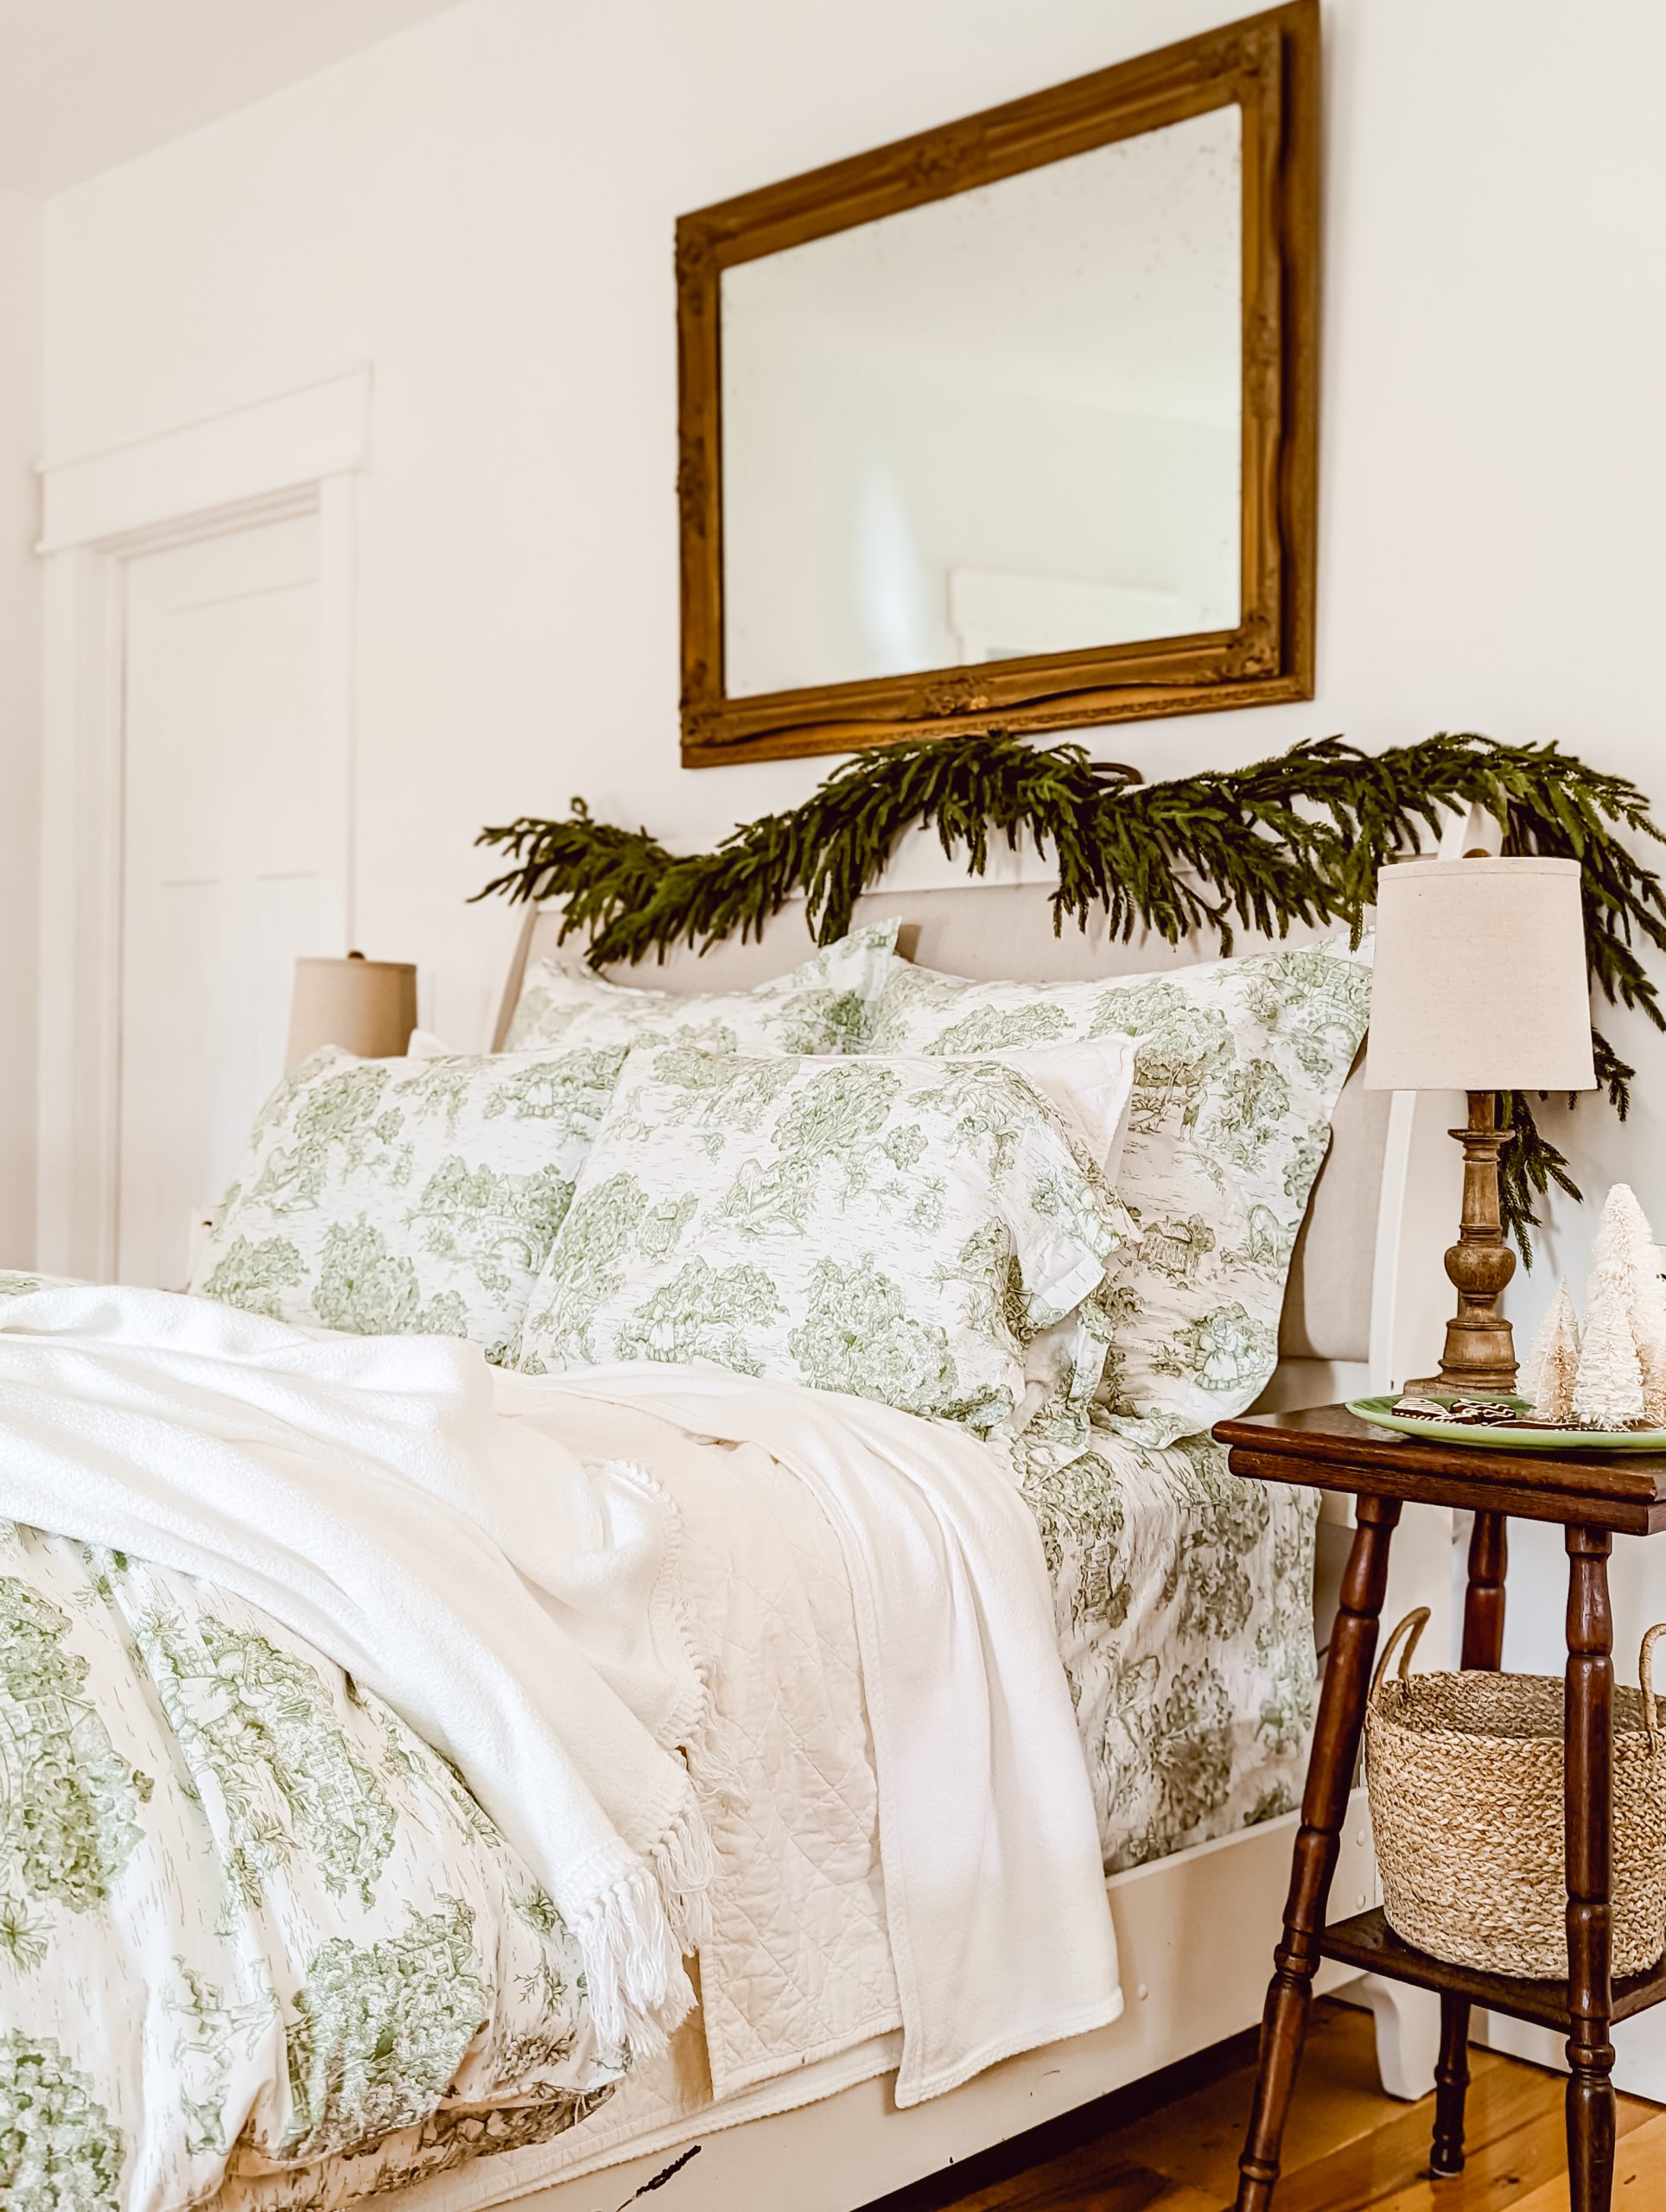 layers of white bedding and green toile patterned bedding for a designer bedding look